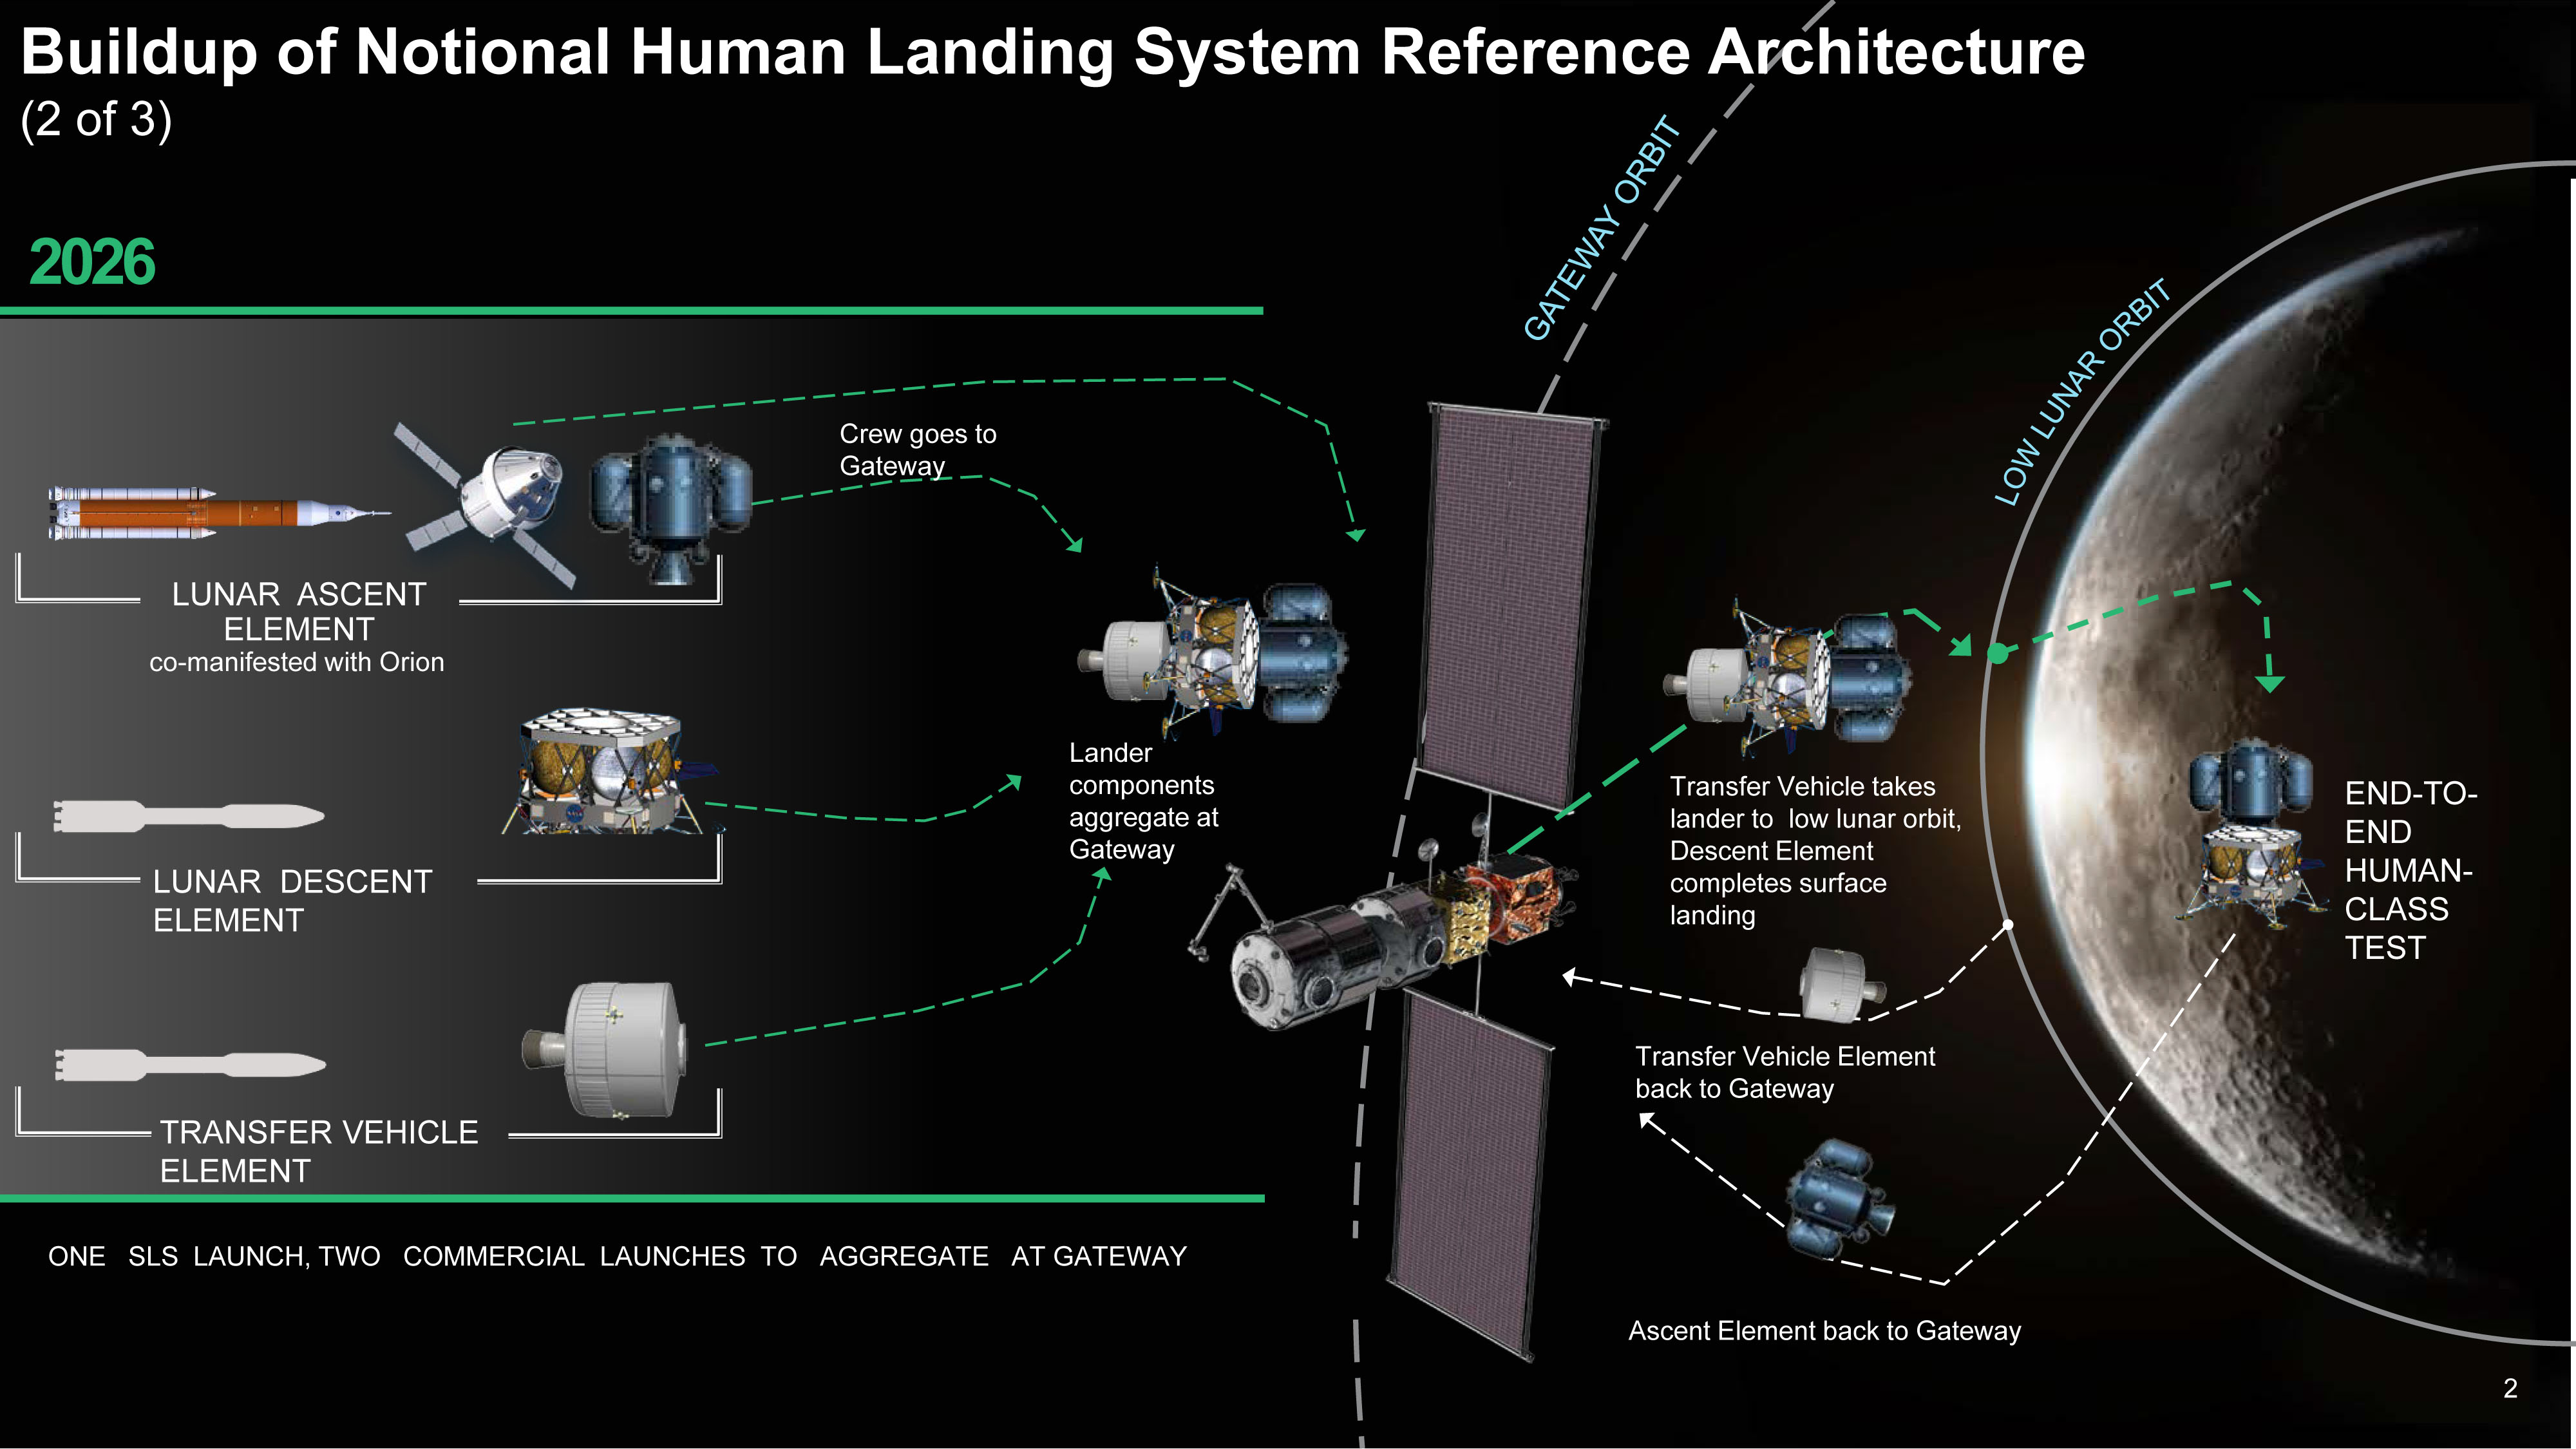 This Is NASA's Plan to Land Astronauts on the Moon in 2028 with